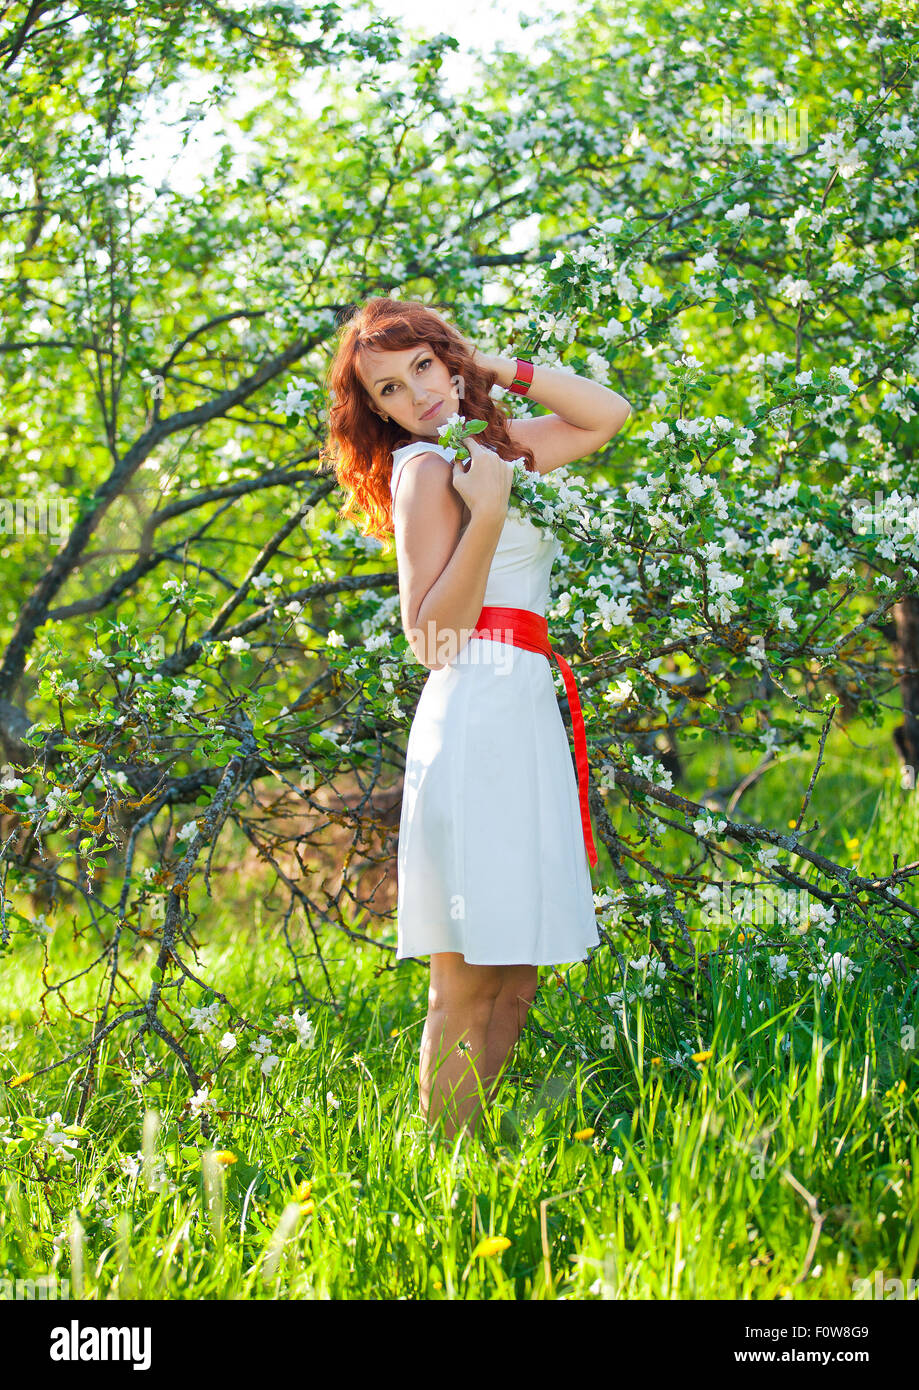 Free Happy Woman with Gorgeous Red Hair Enjoying Nature. Beauty Young Girl Outdoor in Spring Garden. Freedom concept. Healthy Smiling Girl over Green Flowers Nature Background. Apple-trees in Blossom Stock Photo